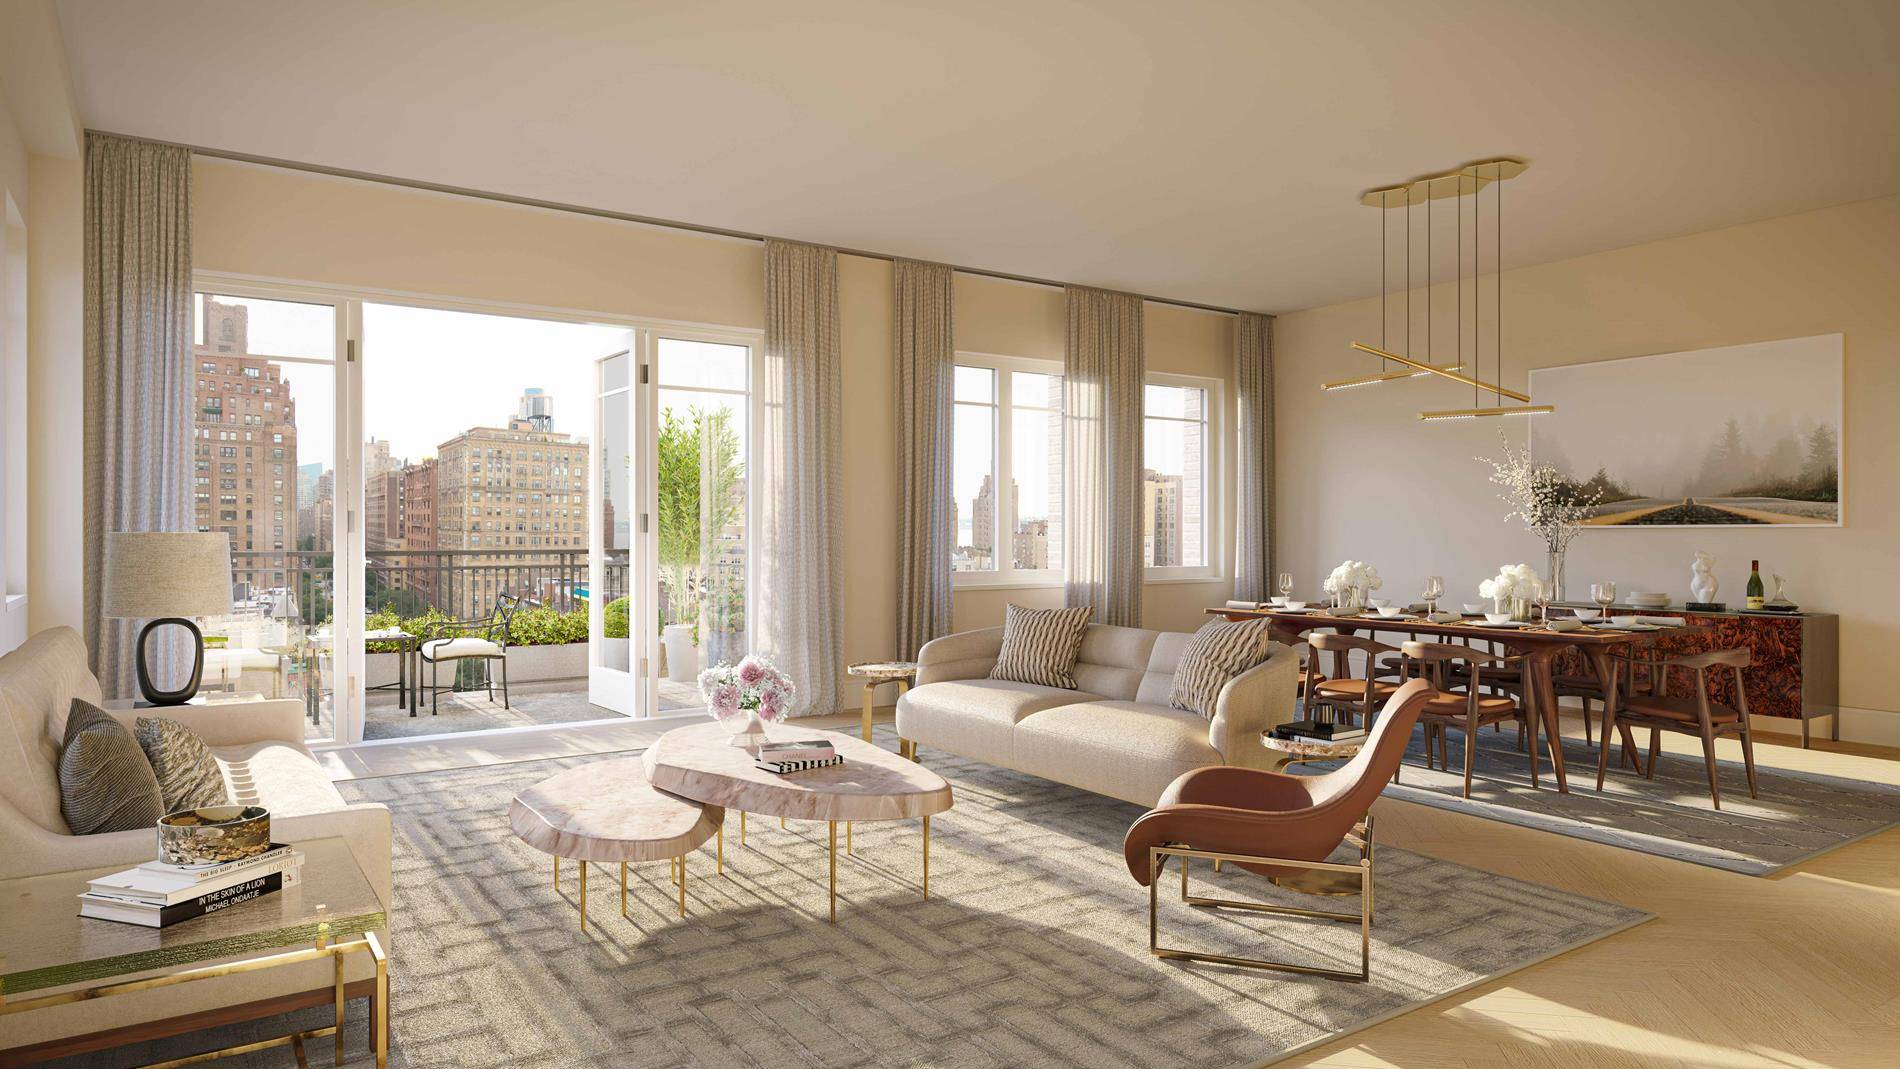 The residences at 378 West End Avenue are designed for the way people live today.